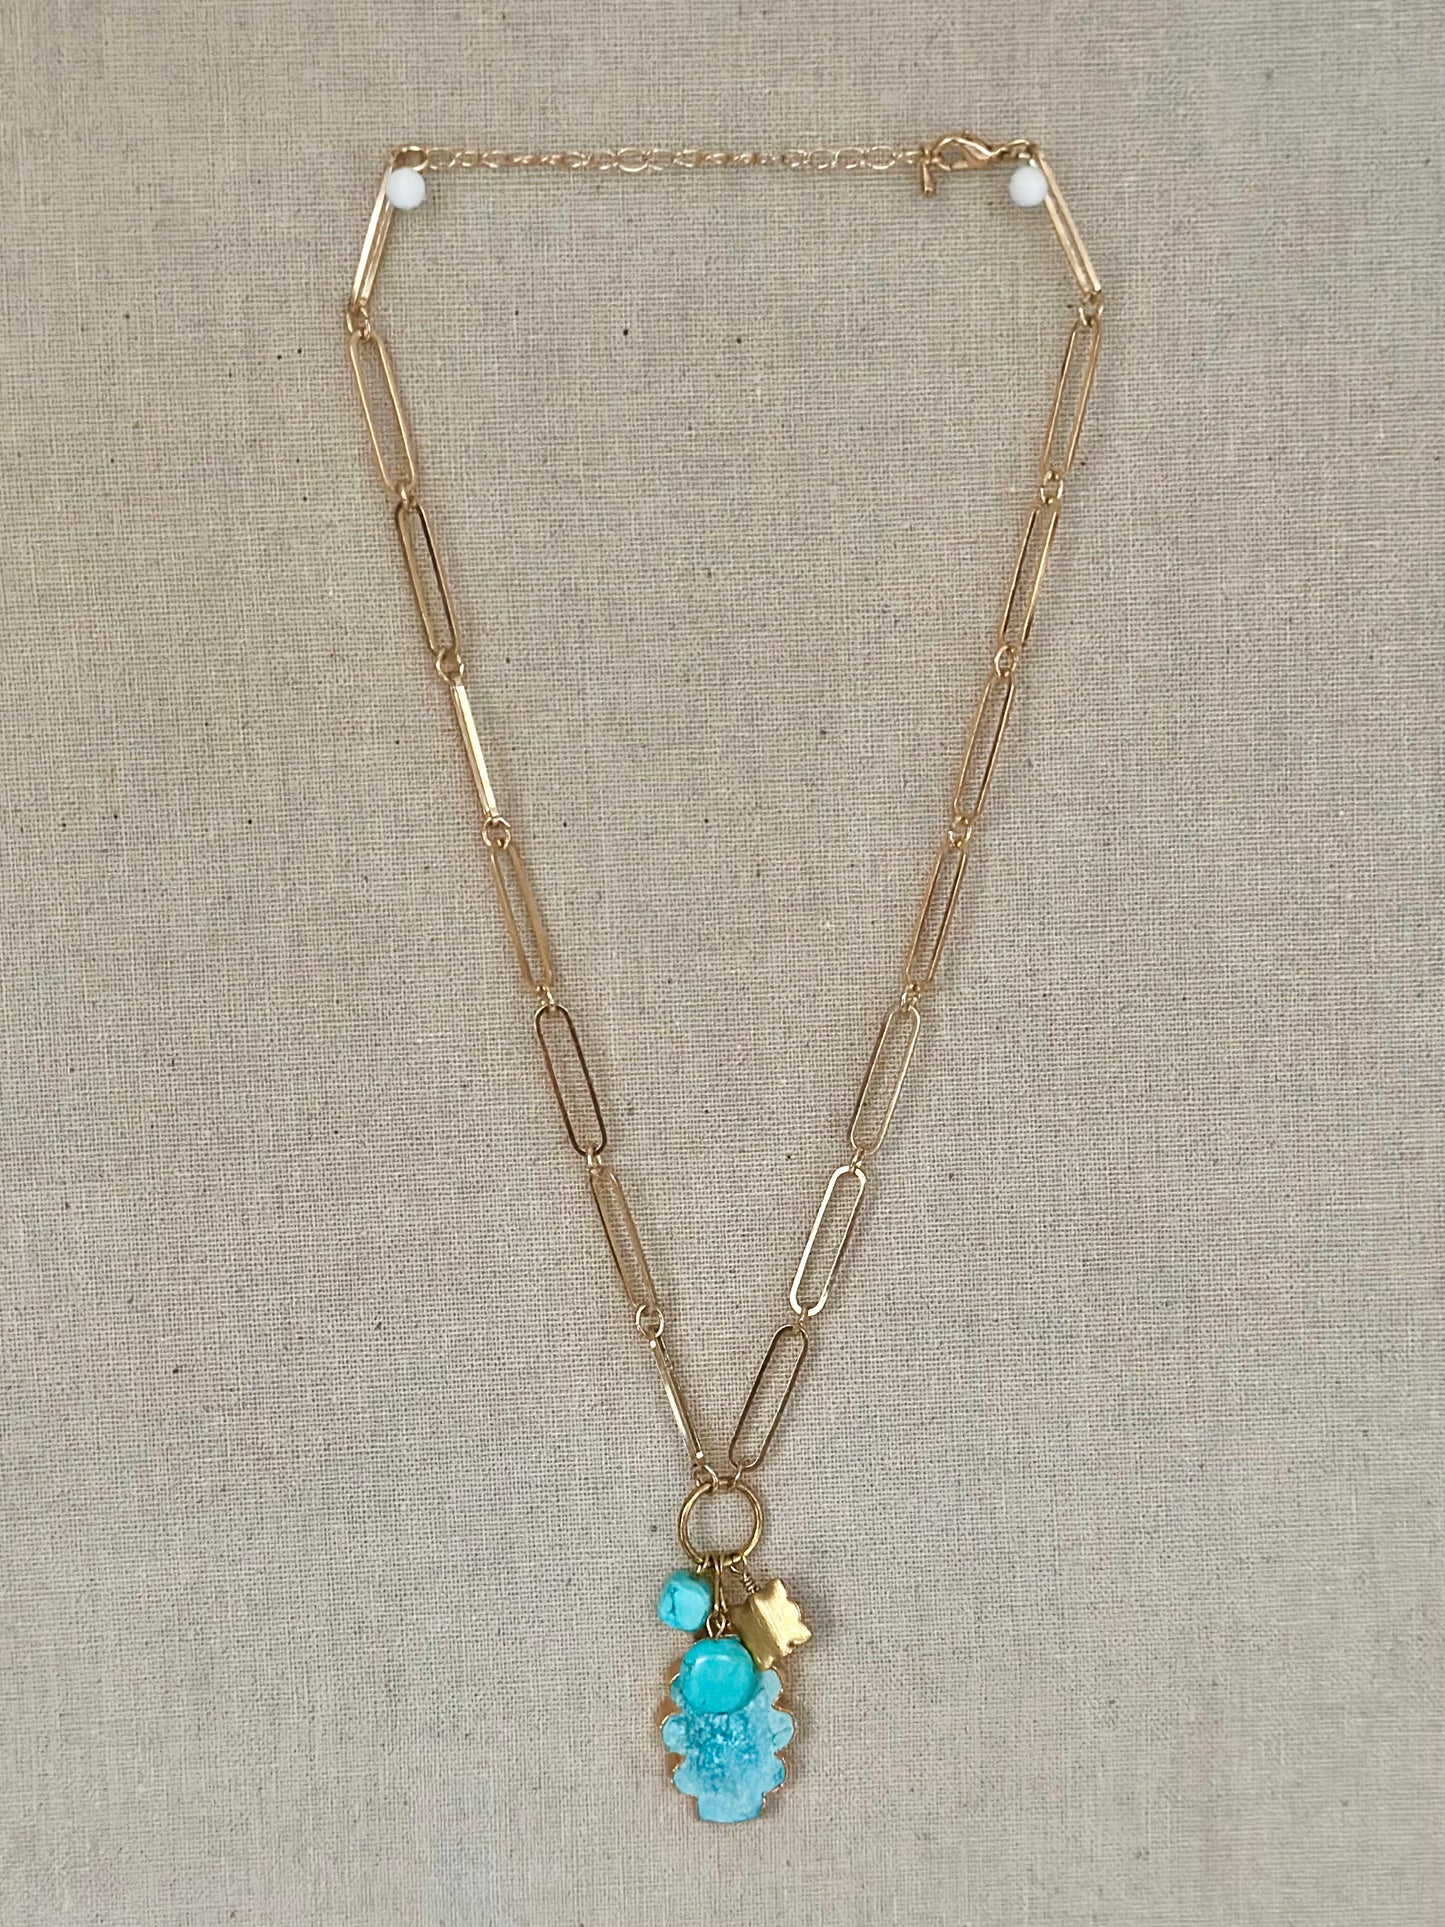 Scalloped speckled turquoise necklace